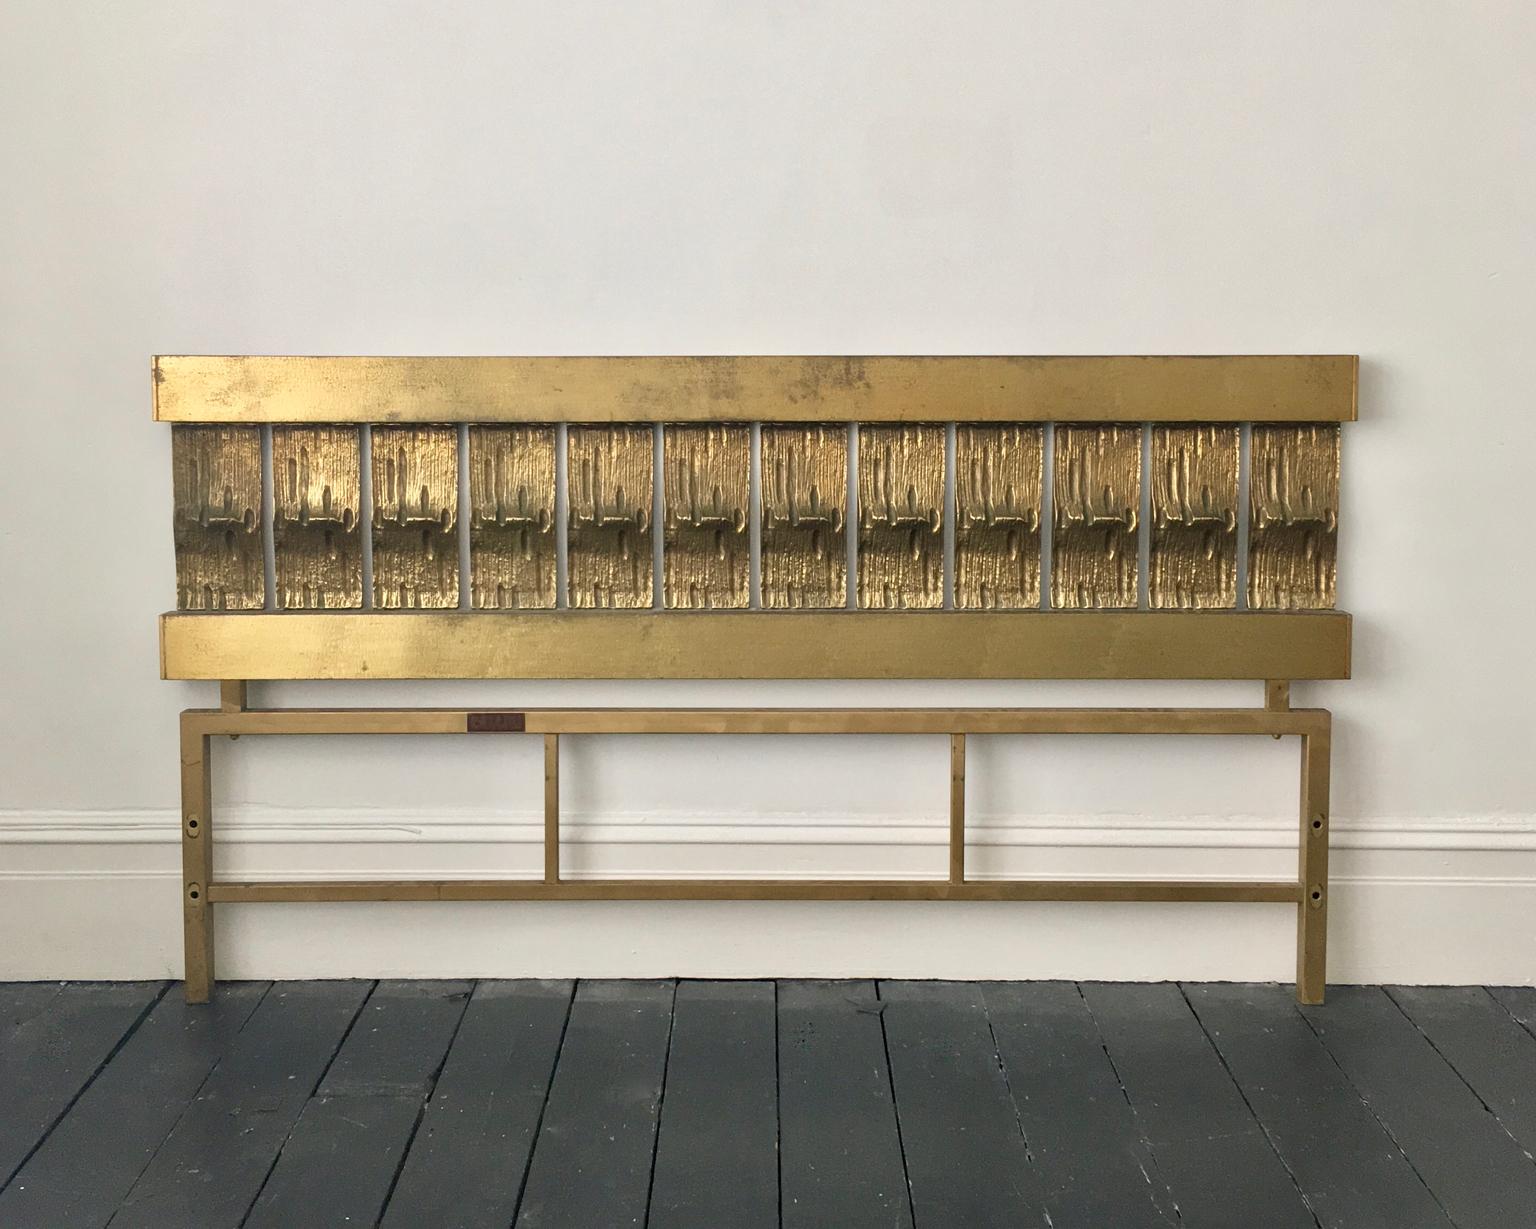 A mid-century modern headboard of cast and hammered brass, by Luciano Frigerio, Italy.

This is a statement piece, with a simple block-like construction, which gives it a strong Brutalist feel. The upper section comprises two cross-bars with